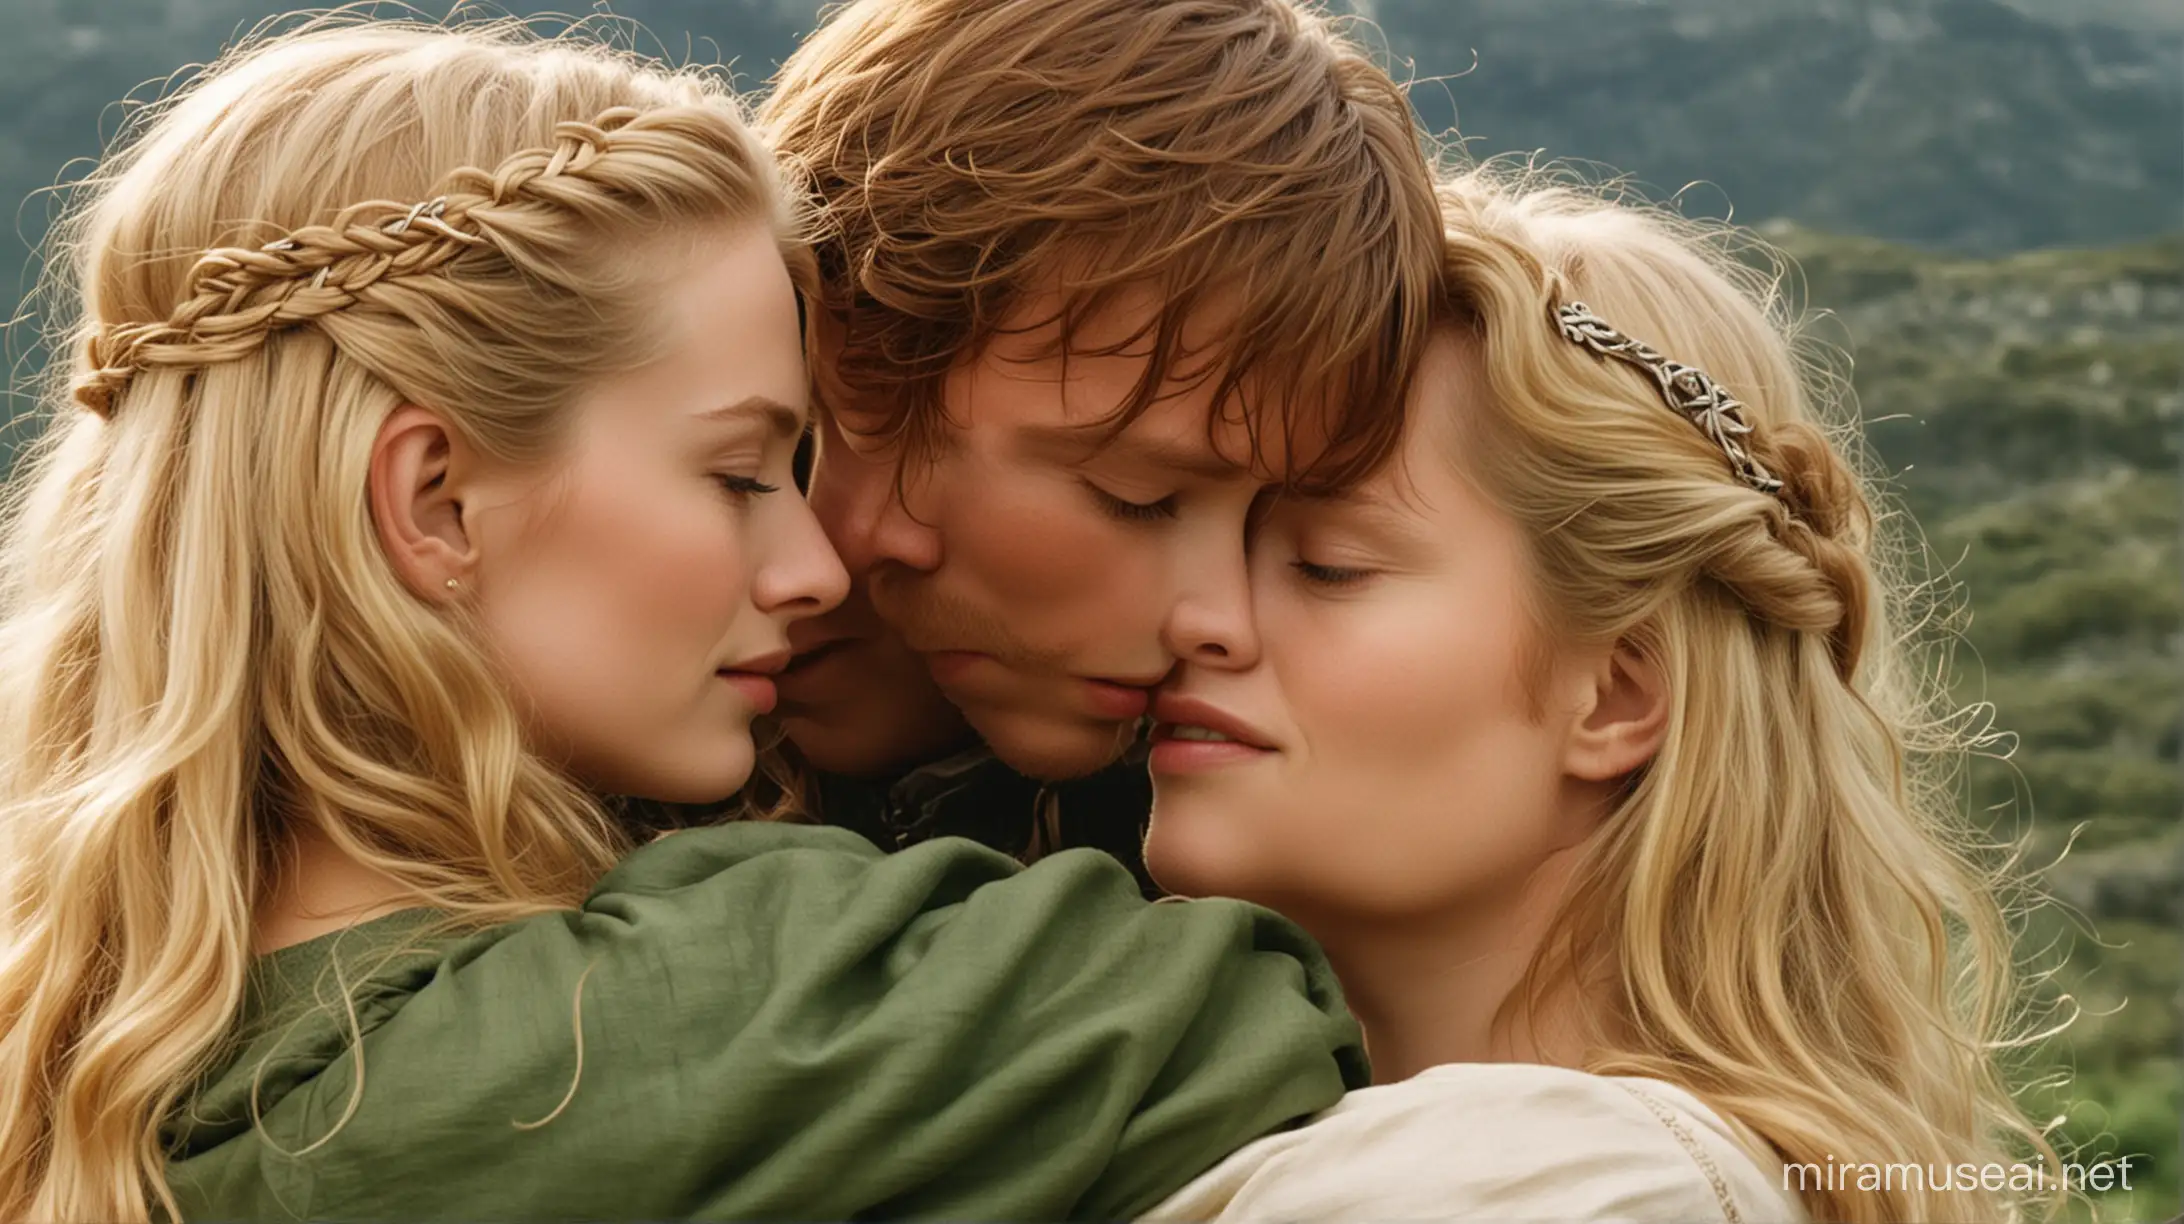 A 1960 fantasy film still image of Eowyn and Faramir clasping each other romantically on the cover